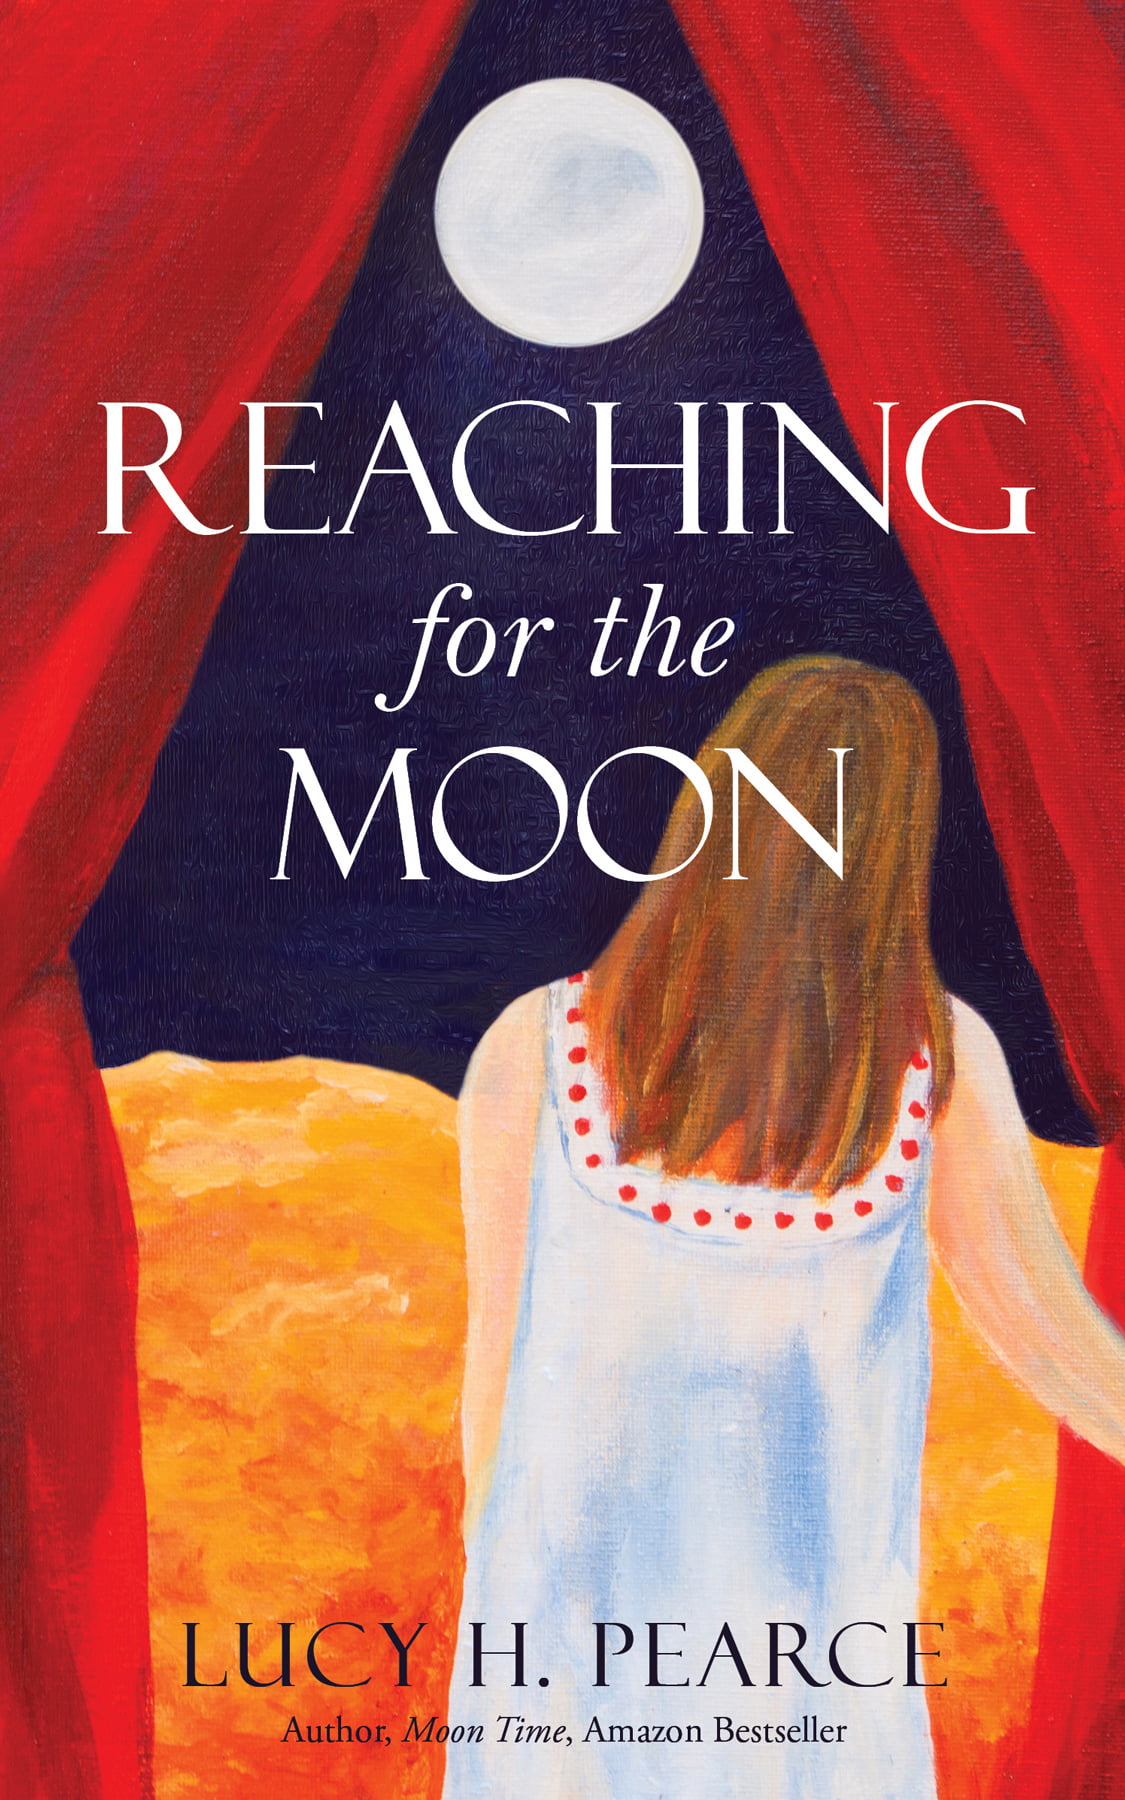 Reaching for the Moon by Lucy H. Pearce, Womancraft Publishing